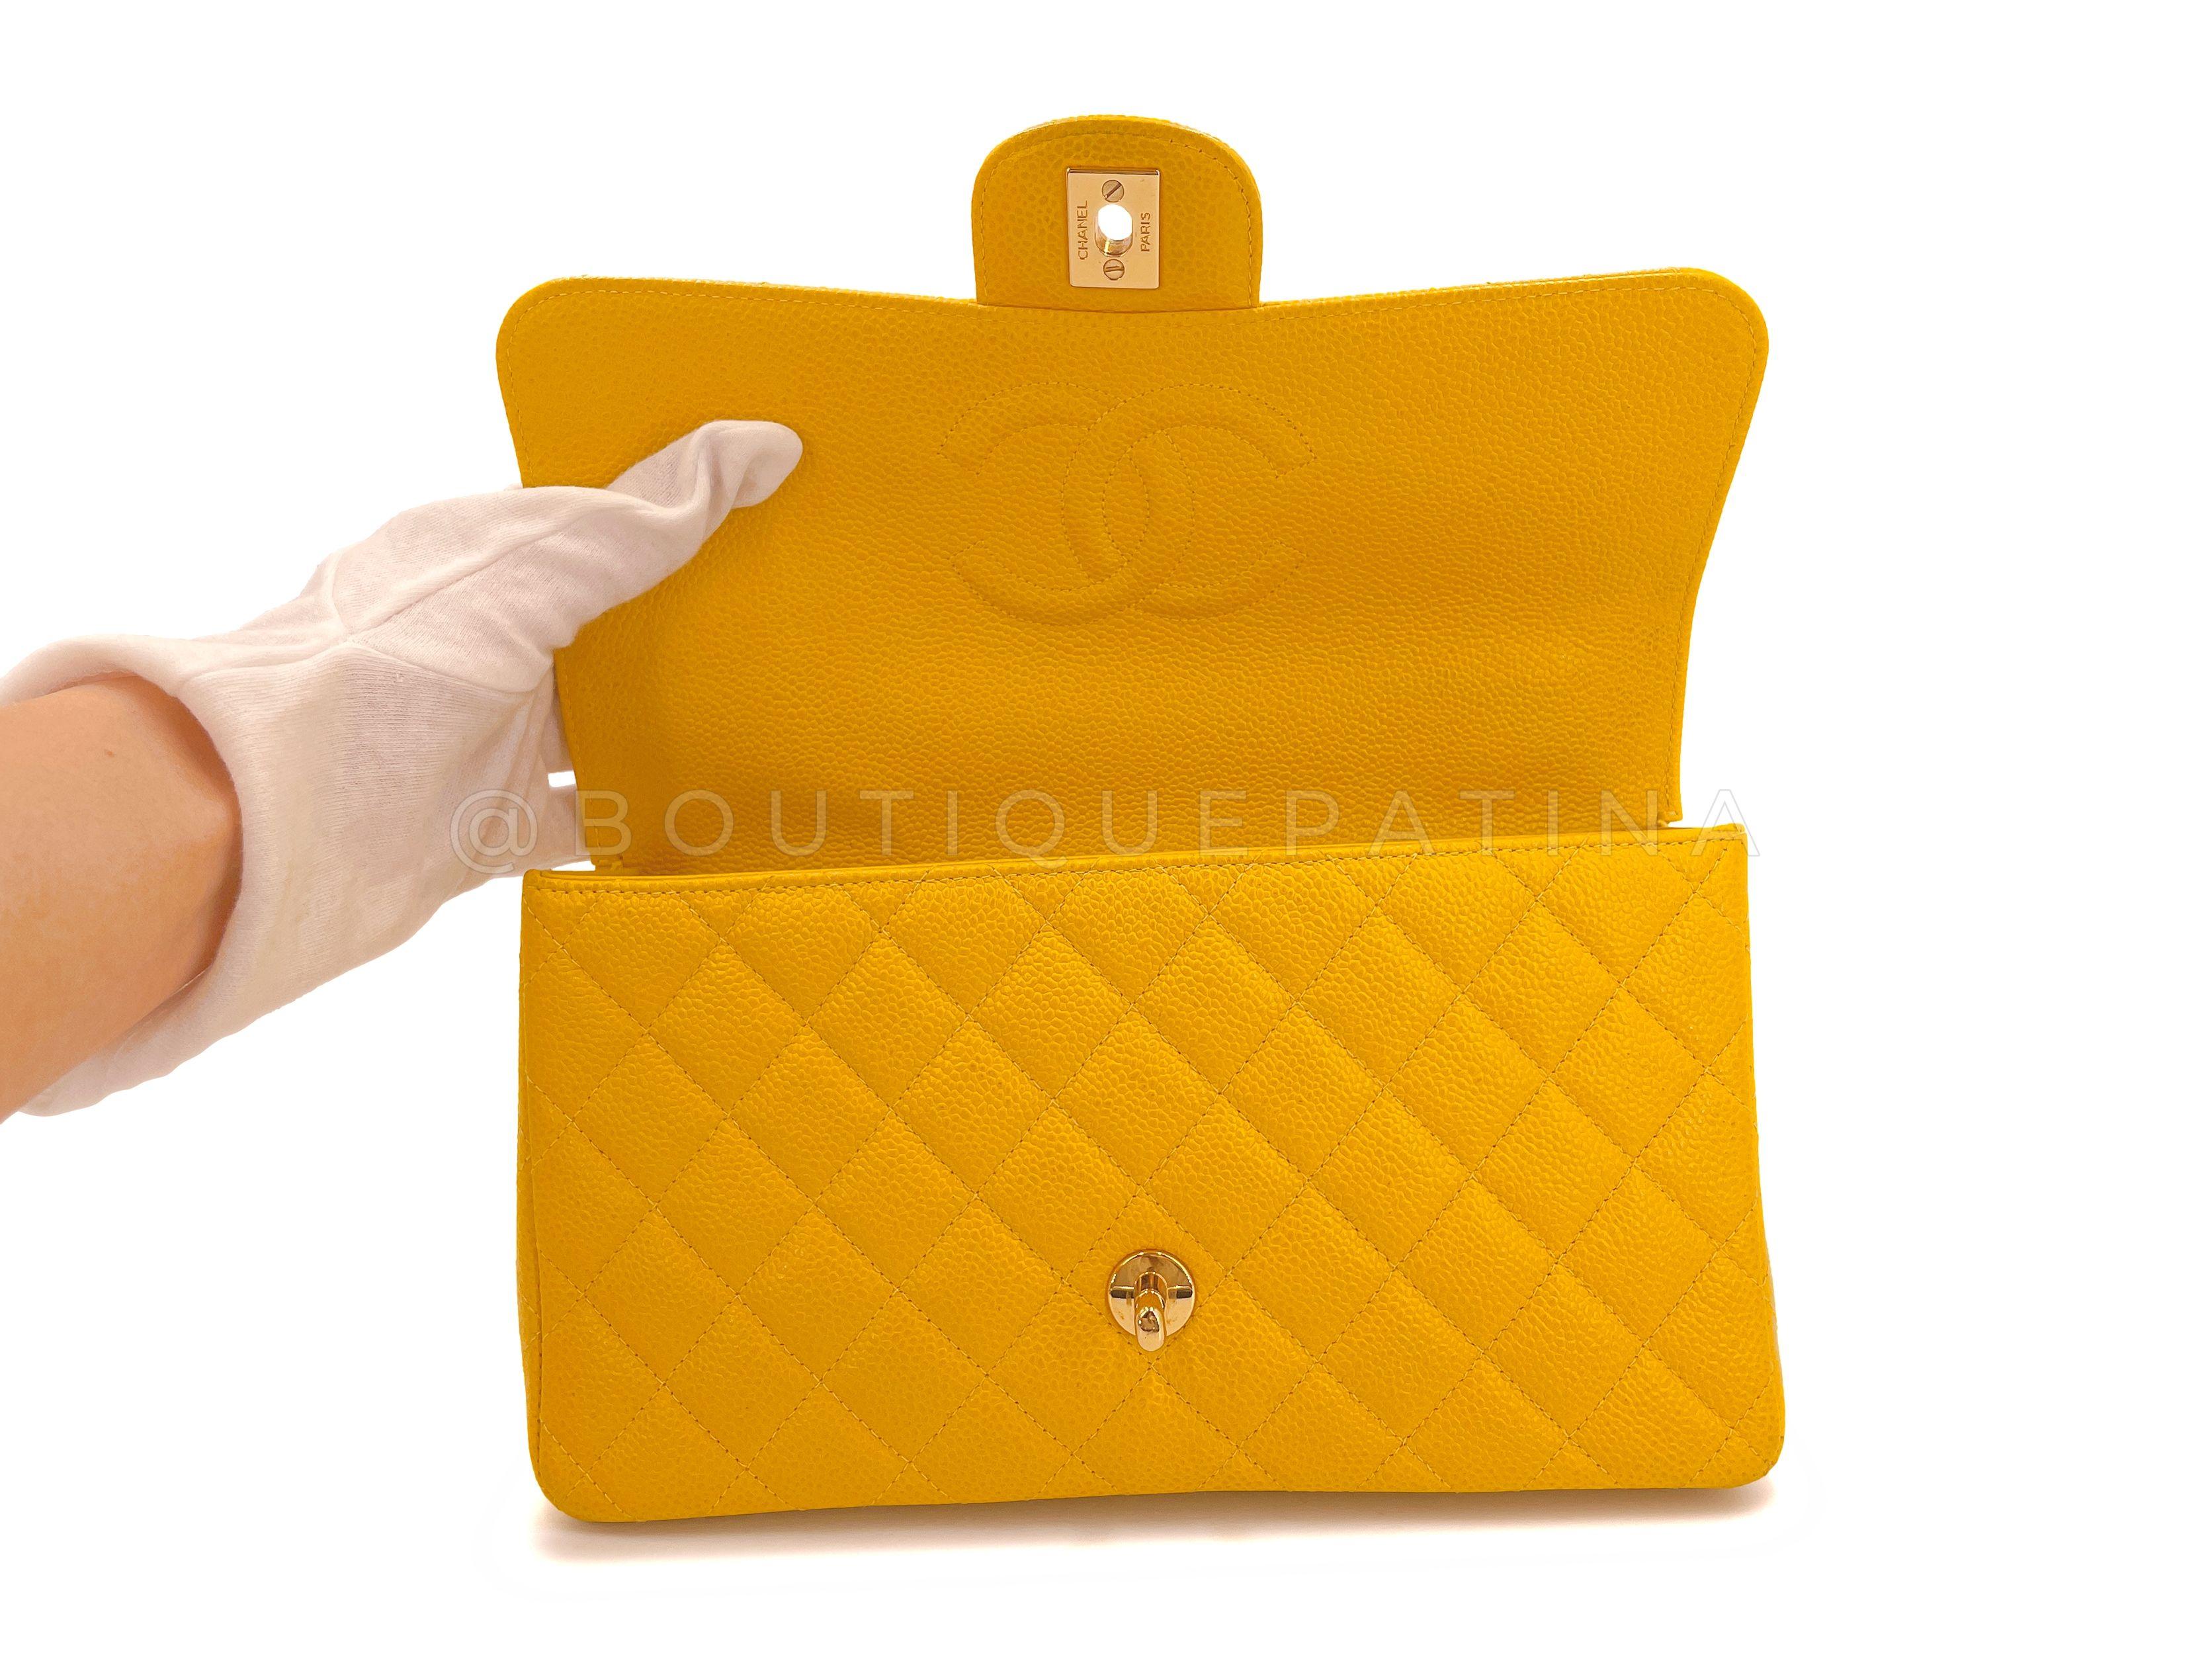 Chanel 1997 Vintage Canary Yellow Caviar Kelly Flap Parent Bag 24k GHW 66771 For Sale 6